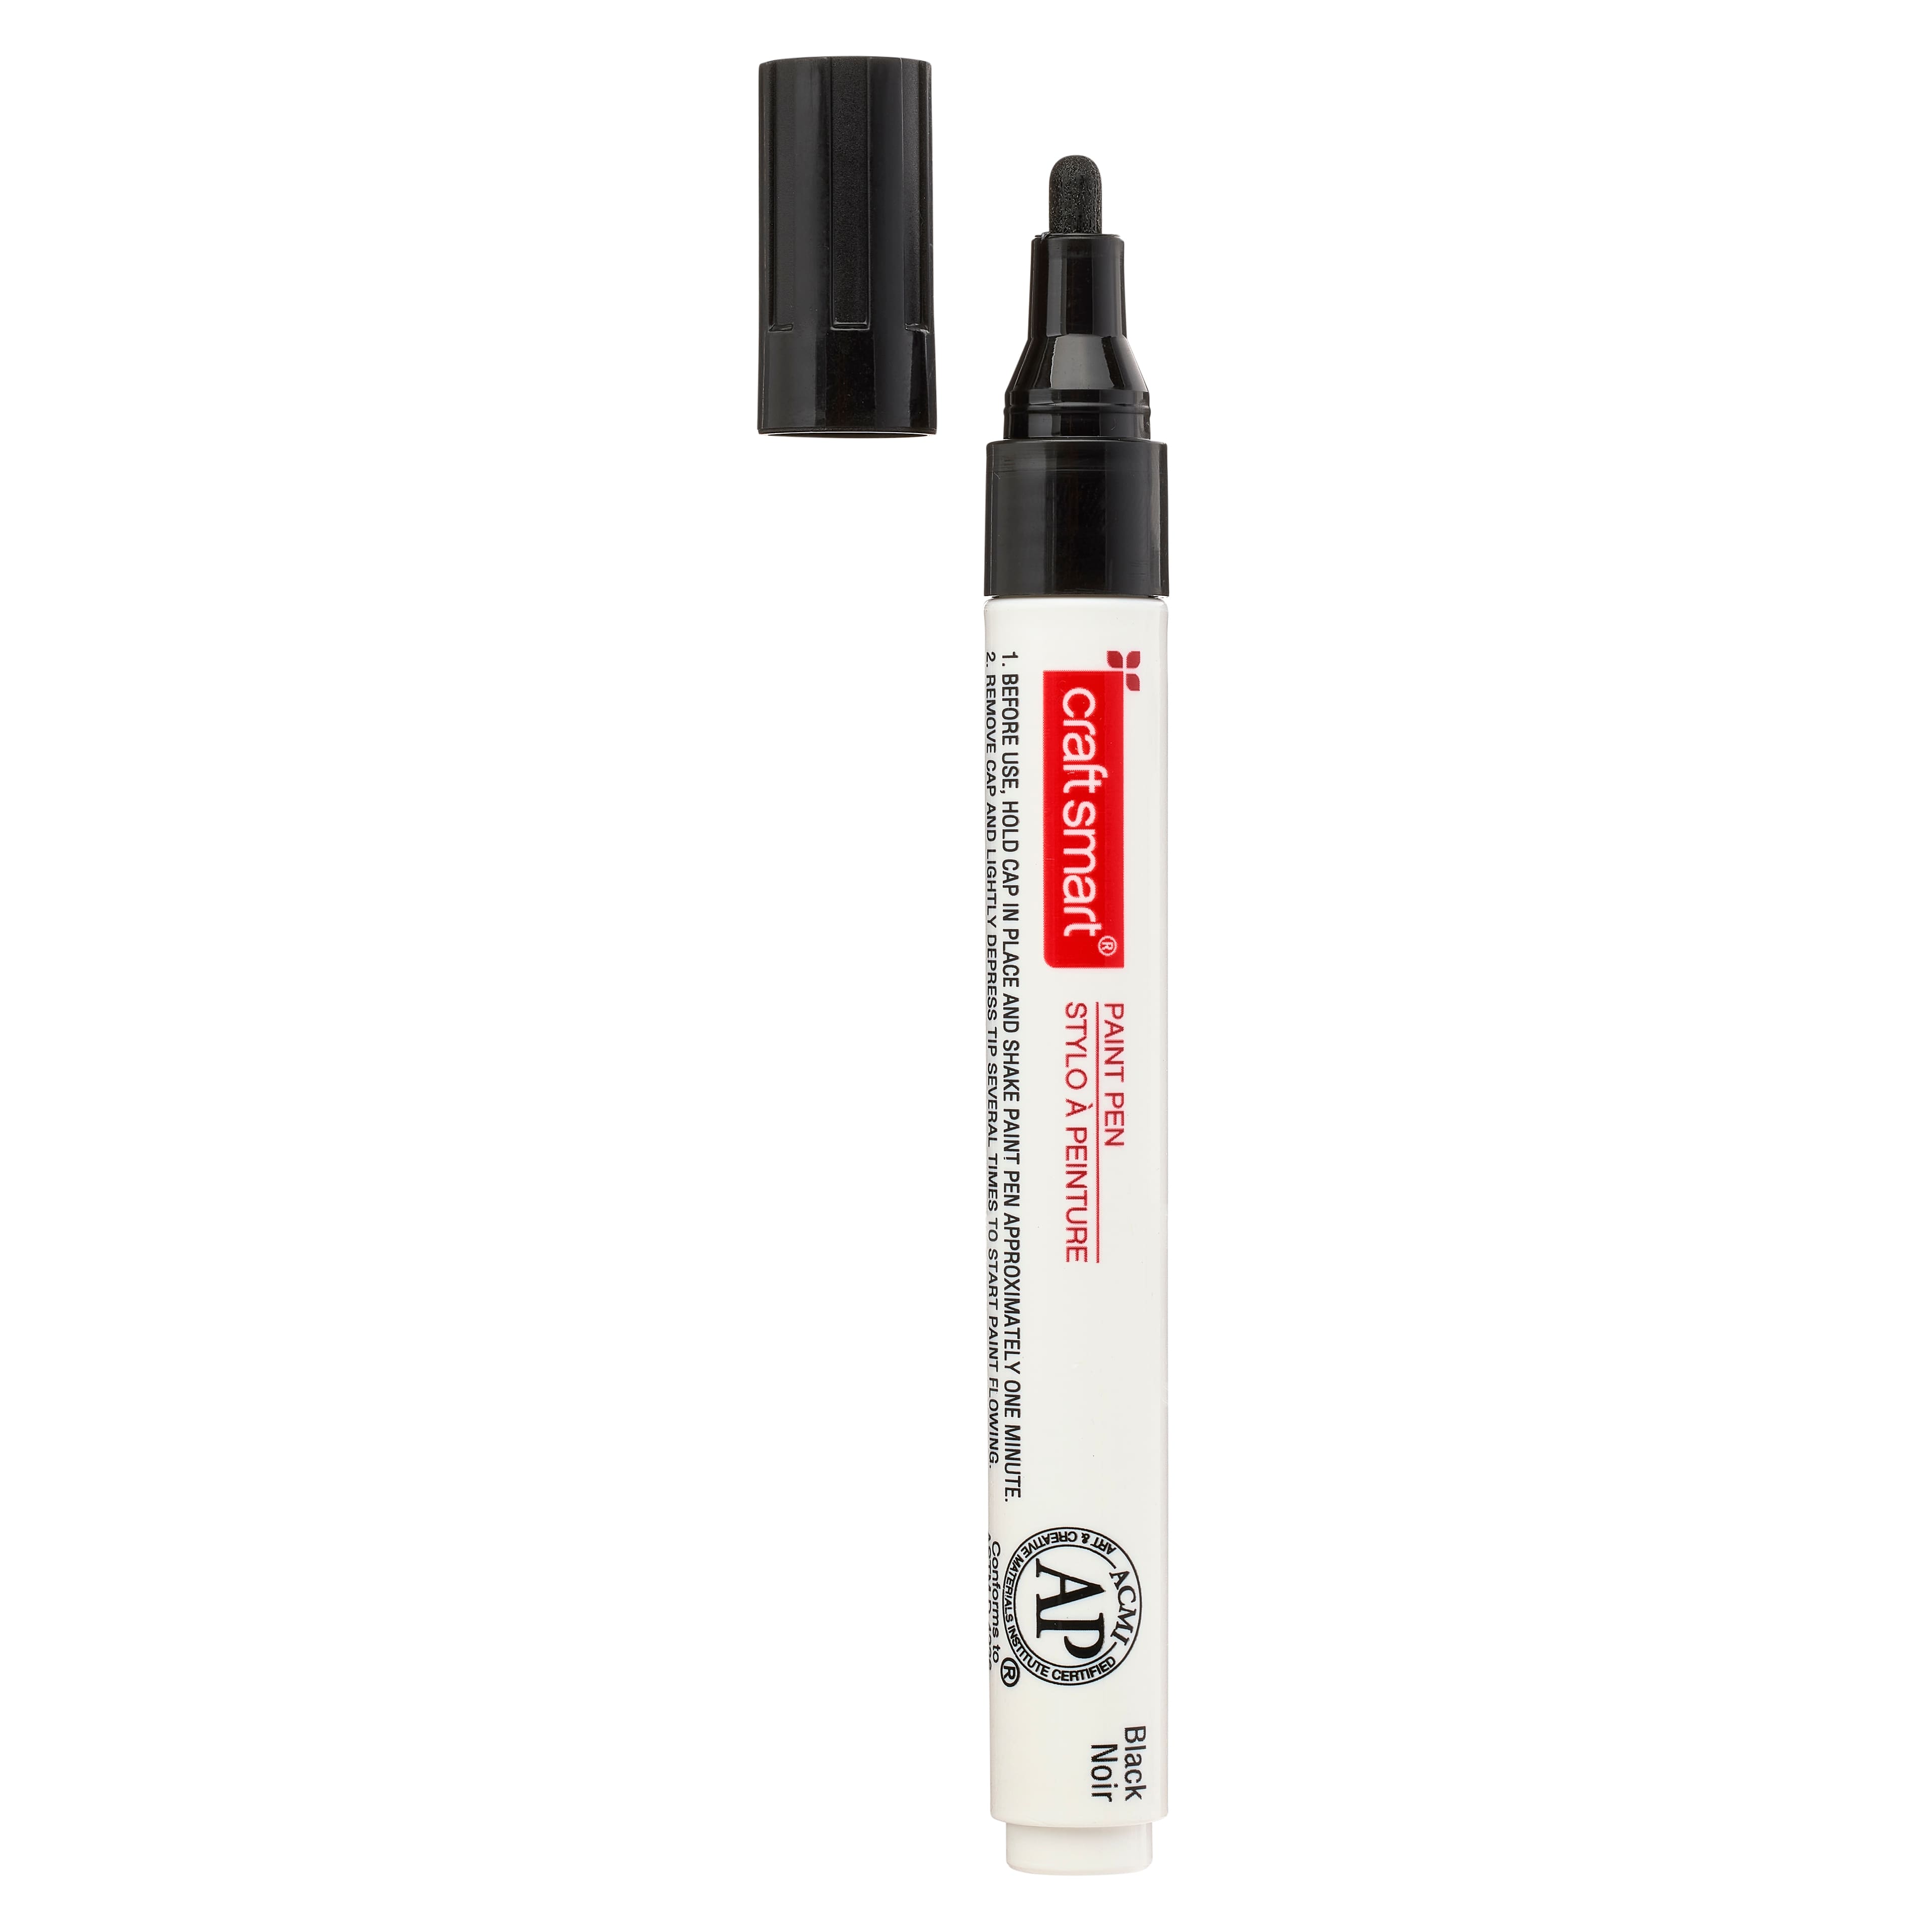 Broad Line Paint Pen by Craft Smart&#xAE;